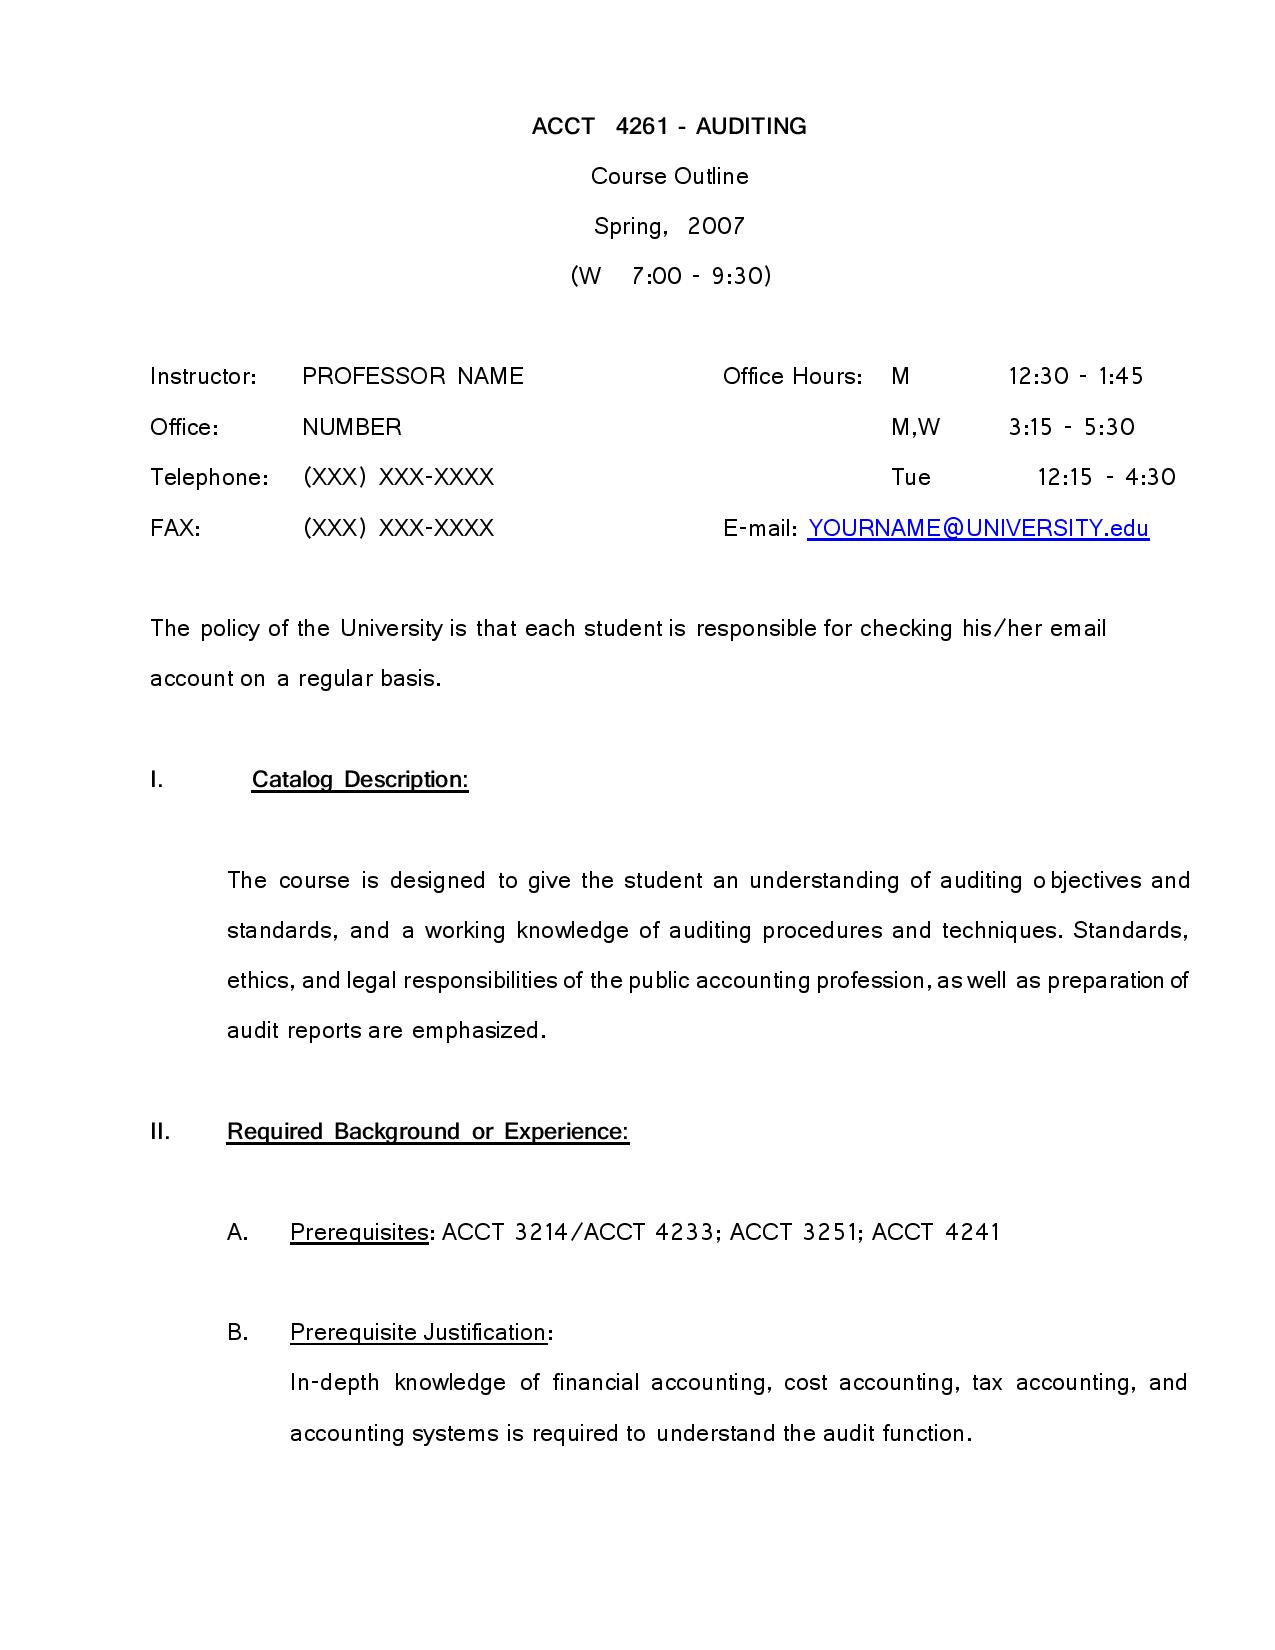 Screenshot of the first page of Auditing Course Sample Syllabus